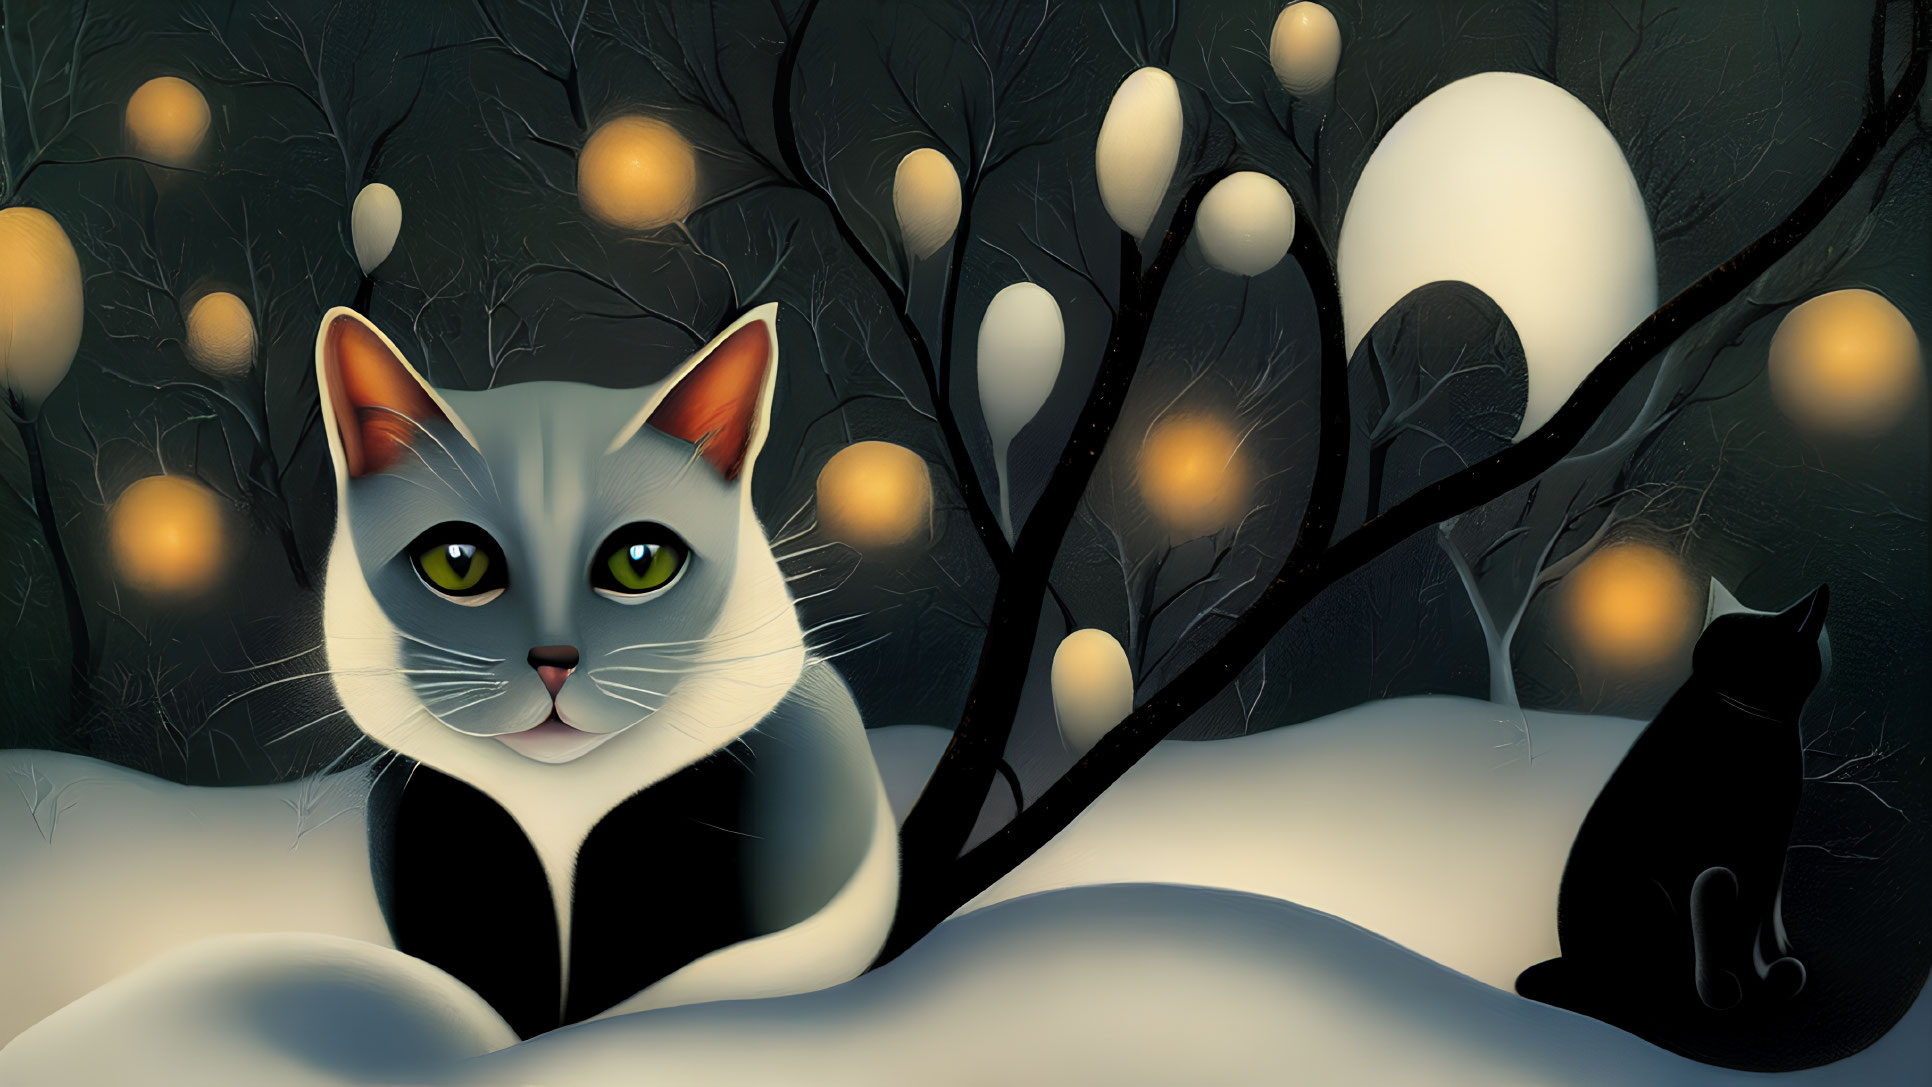 Two cats in snowy night landscape with glowing orbs and bare trees